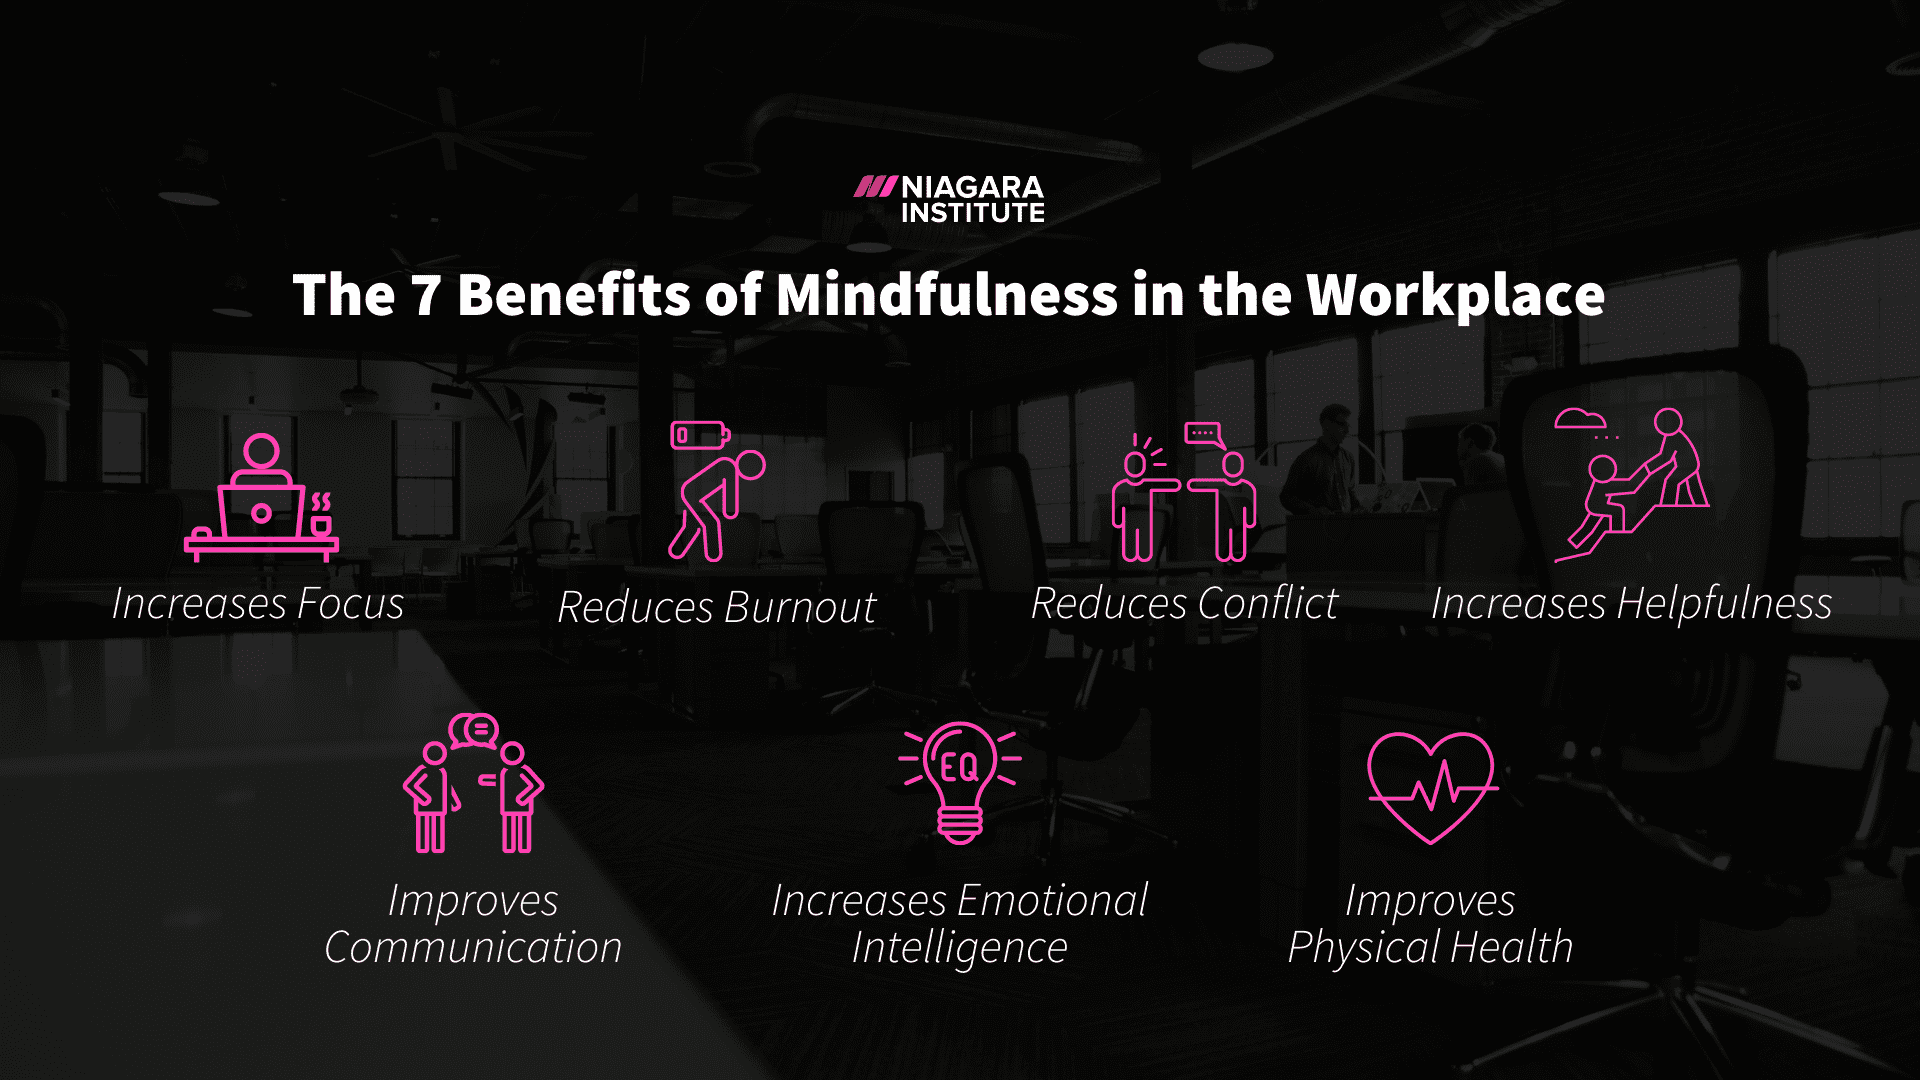 The 7 Benefits of Mindfulness in the Workplace (1)